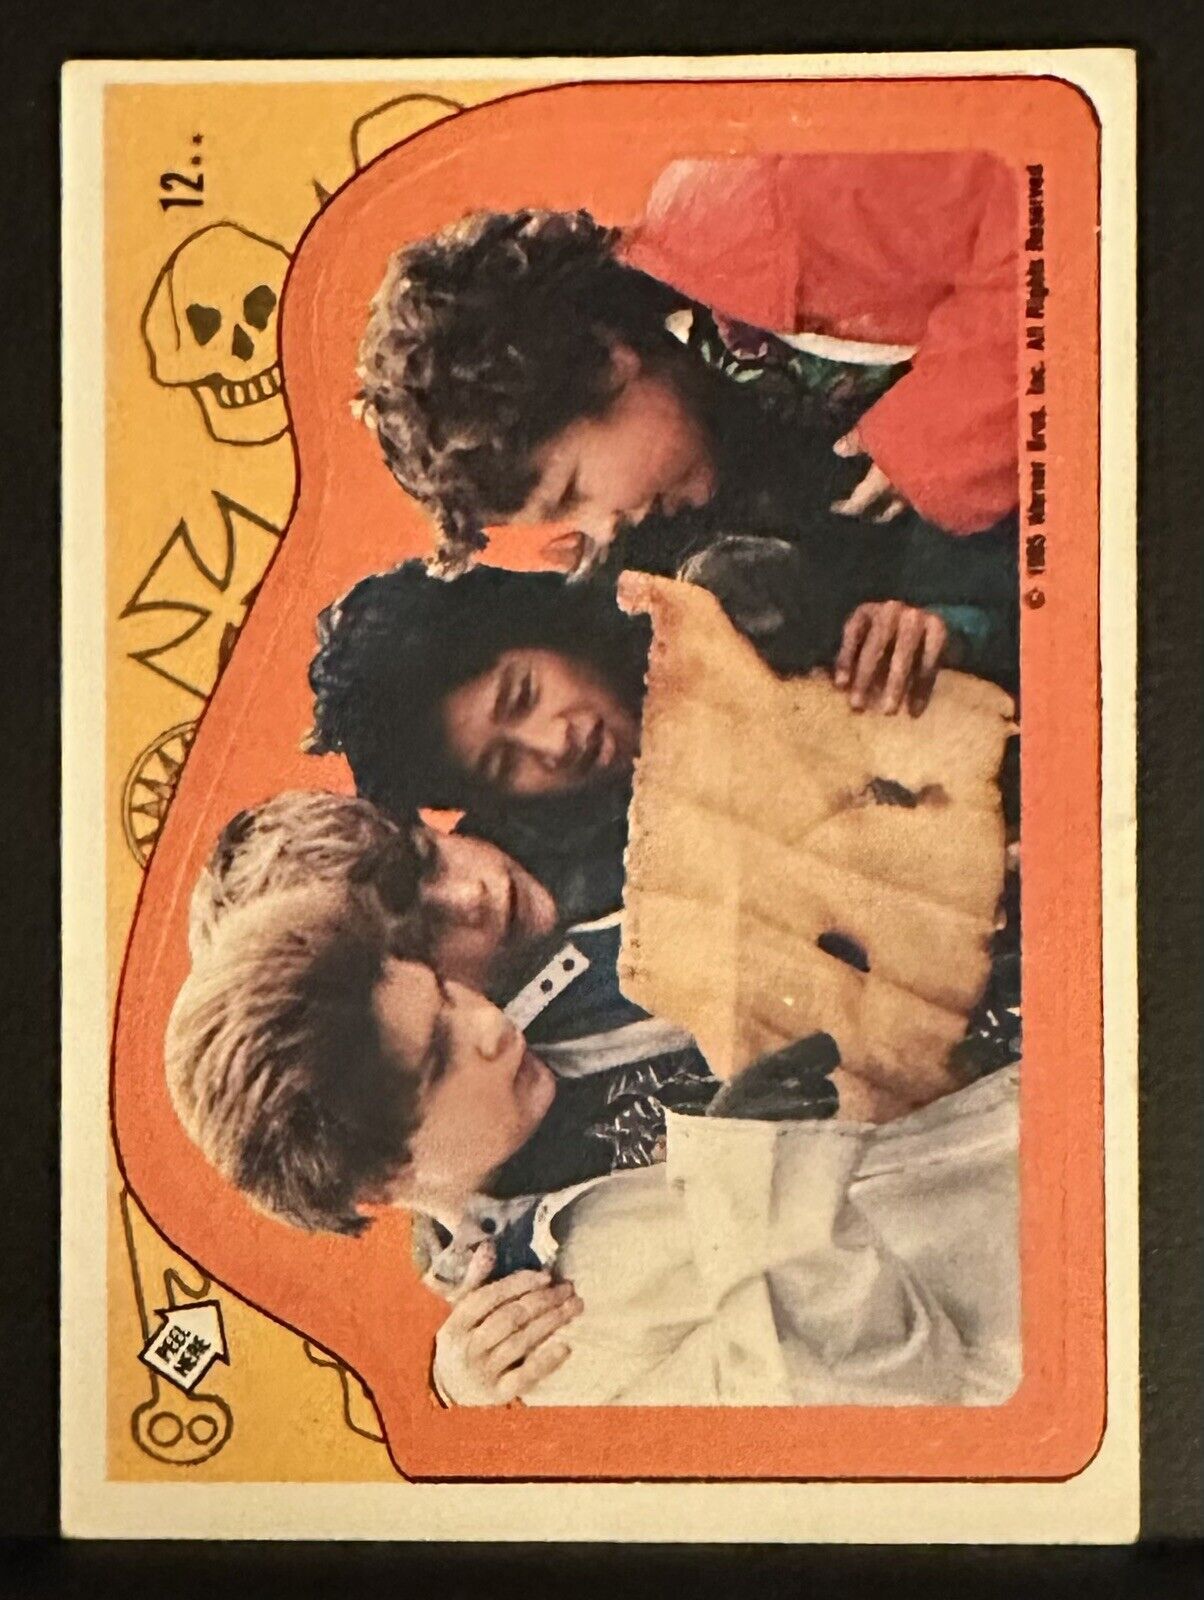 1985 Topps The Goonies Sticker Card # 12 EX *4for4Cards*